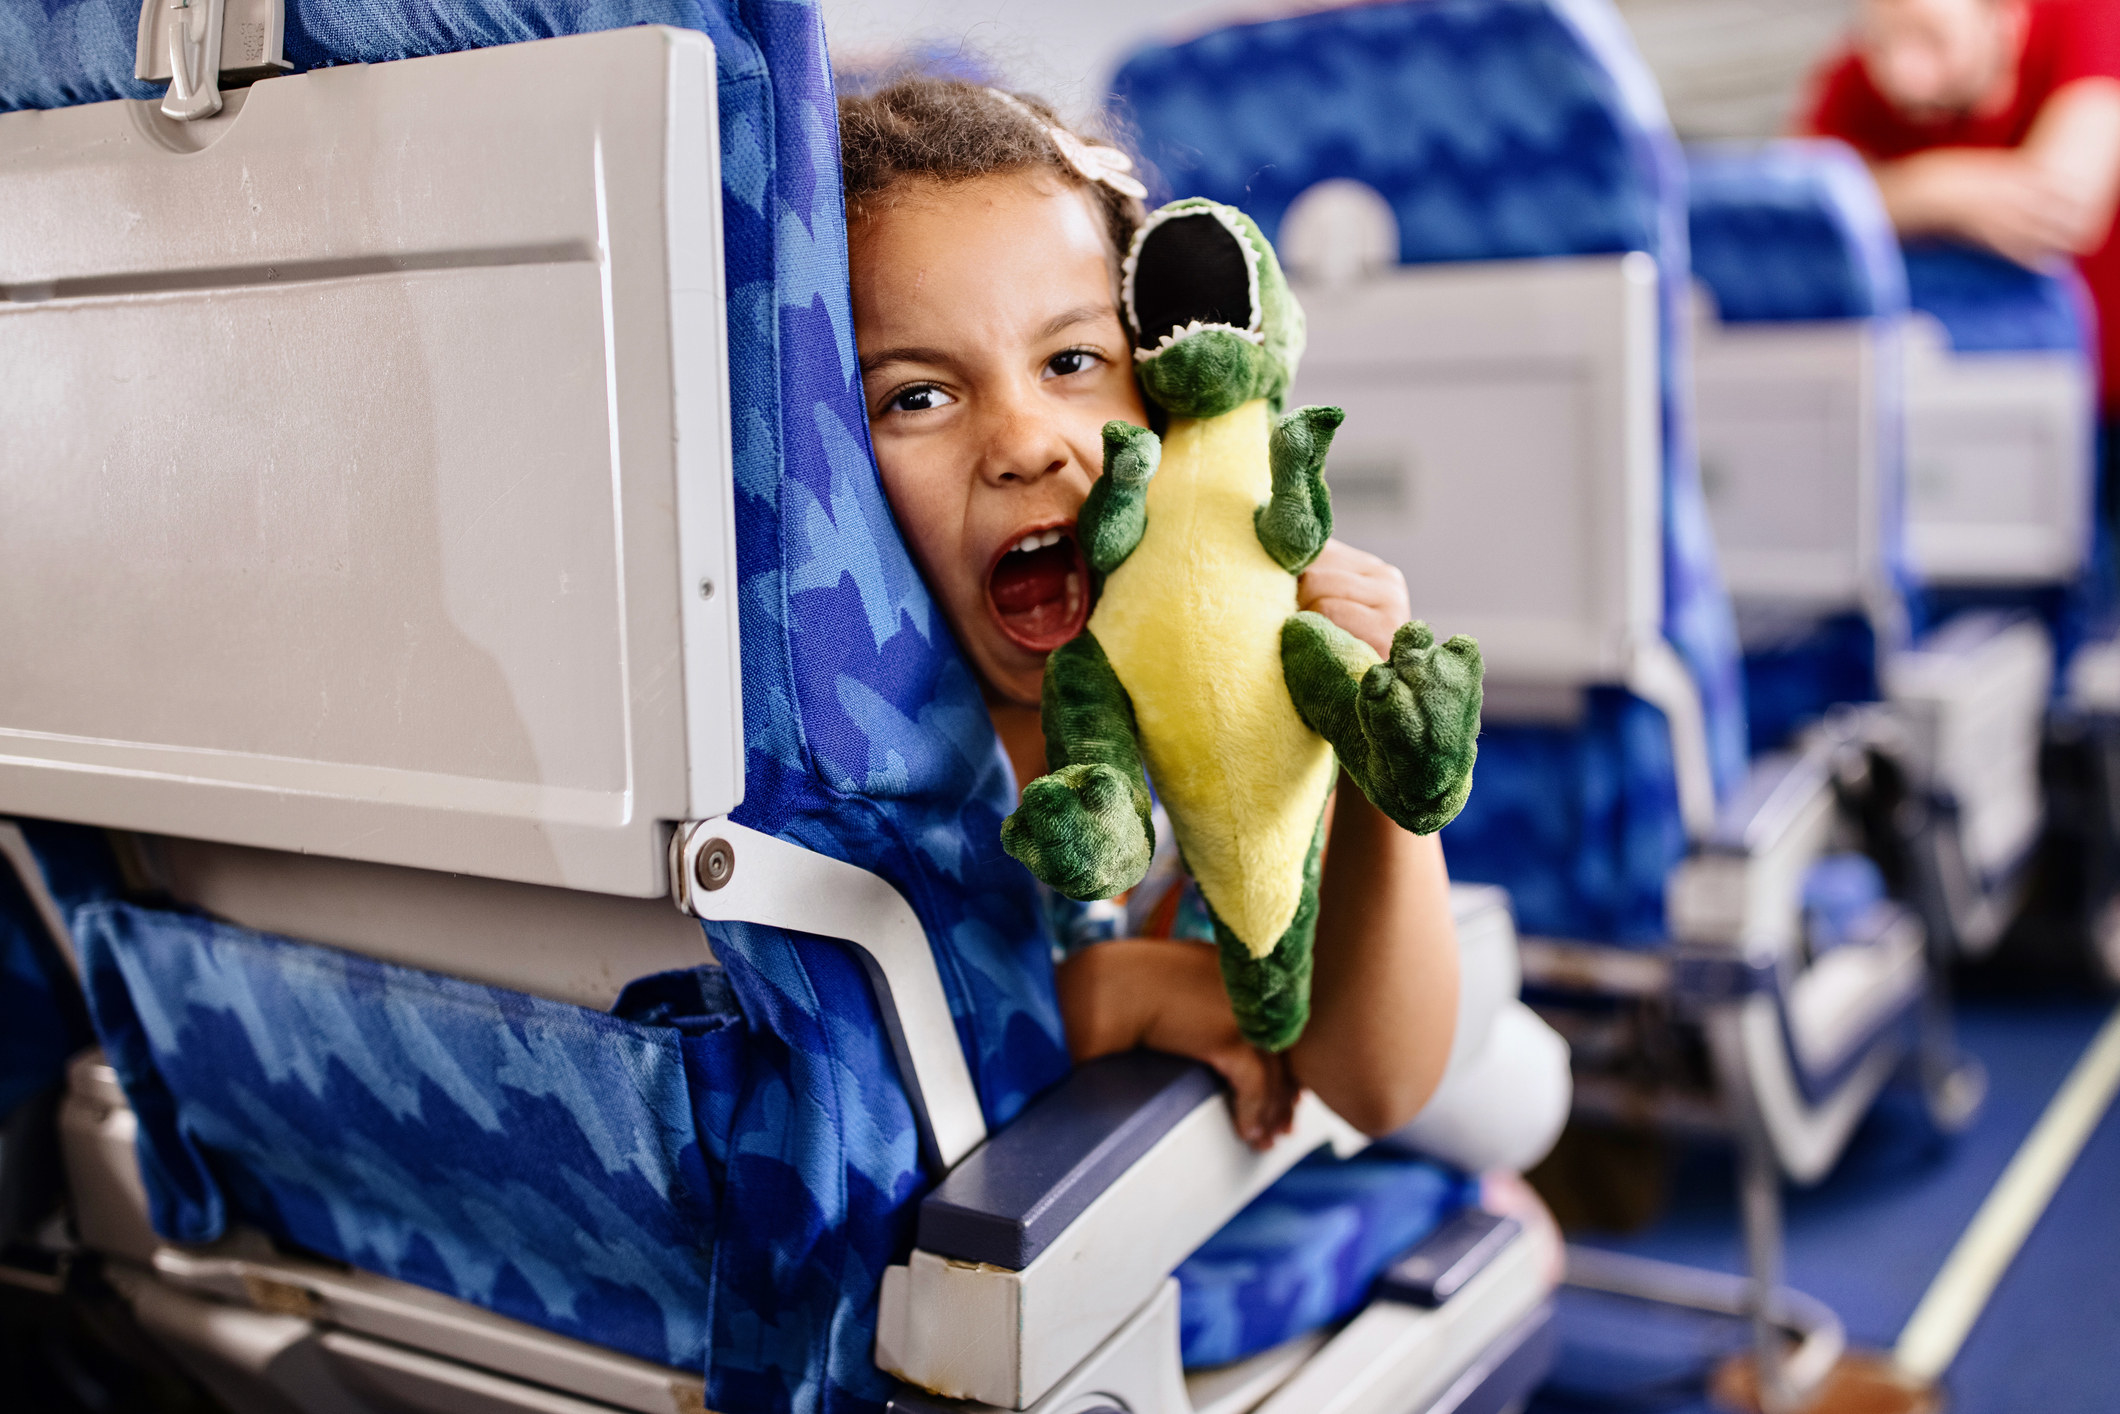 A kid on a plane with a toy dinosaur